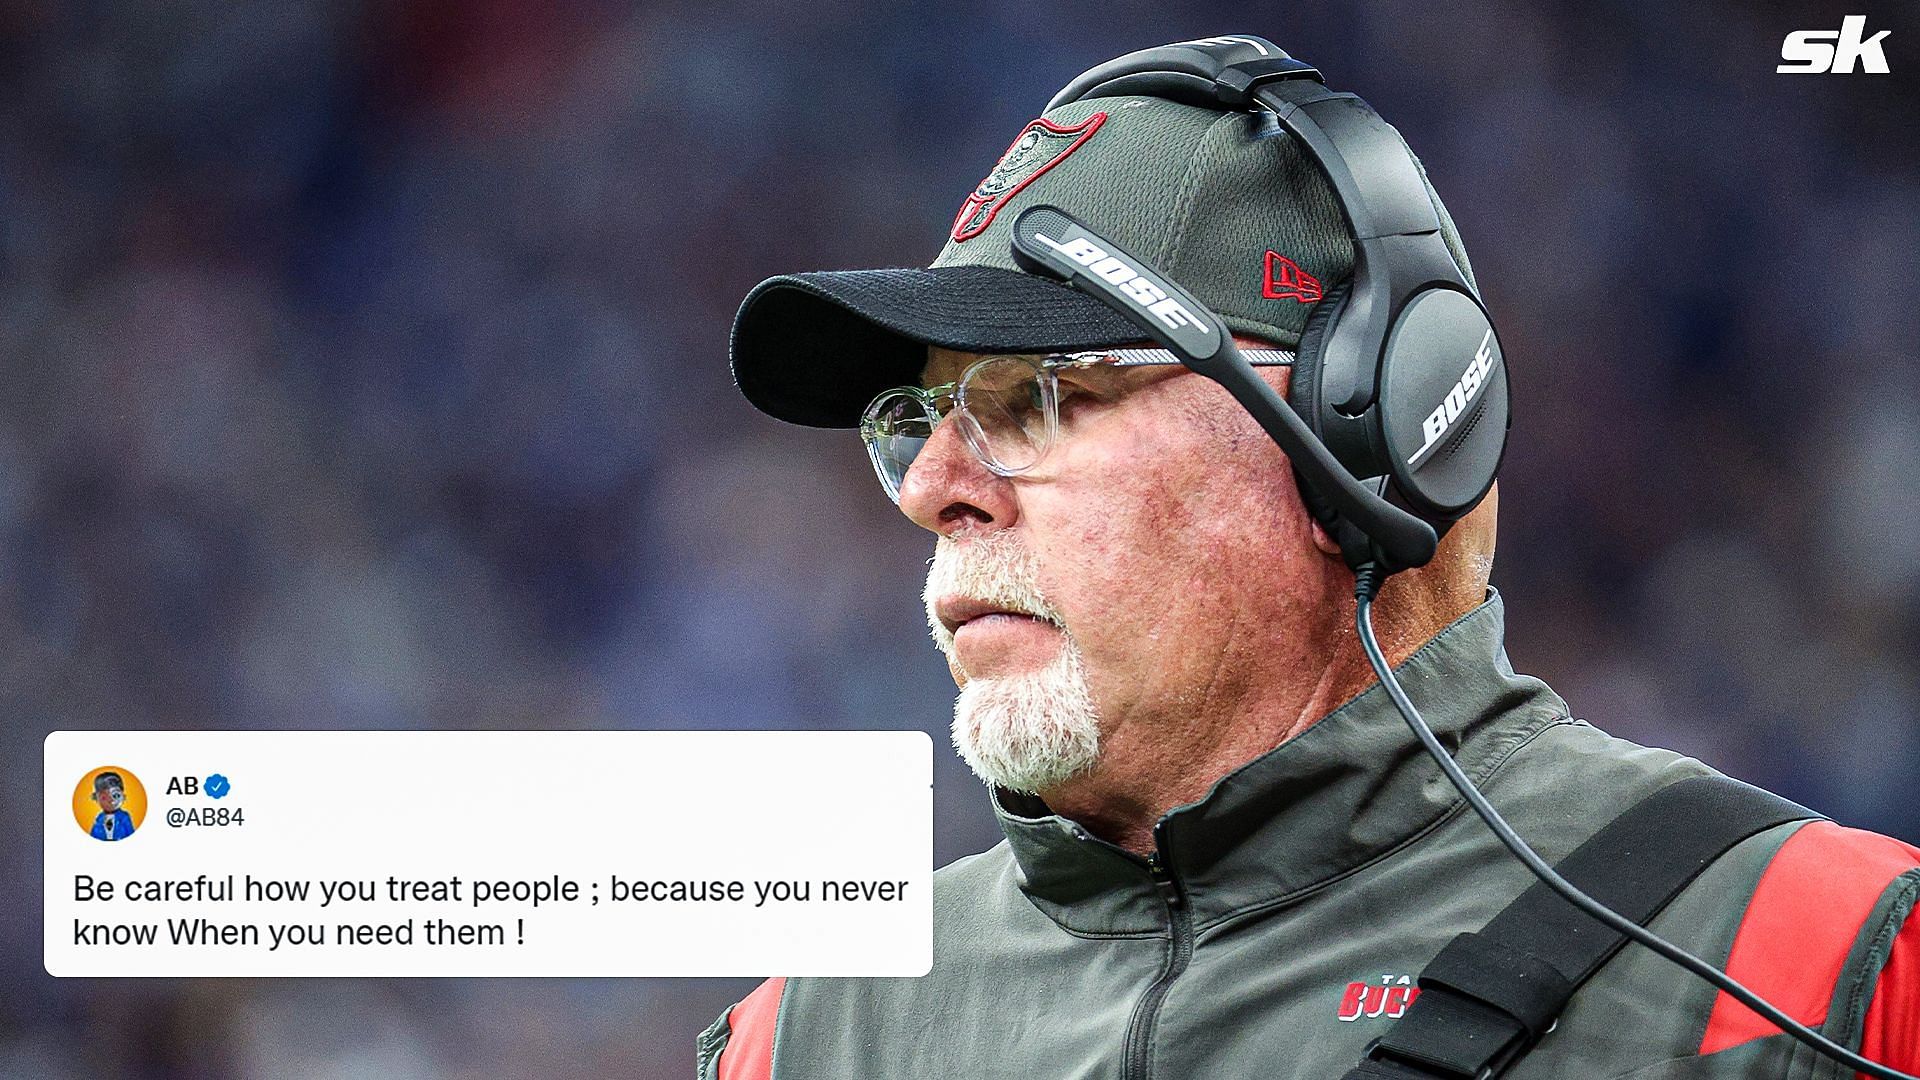 Bruce Arians, head coach of the Tampa Bay Buccaneers